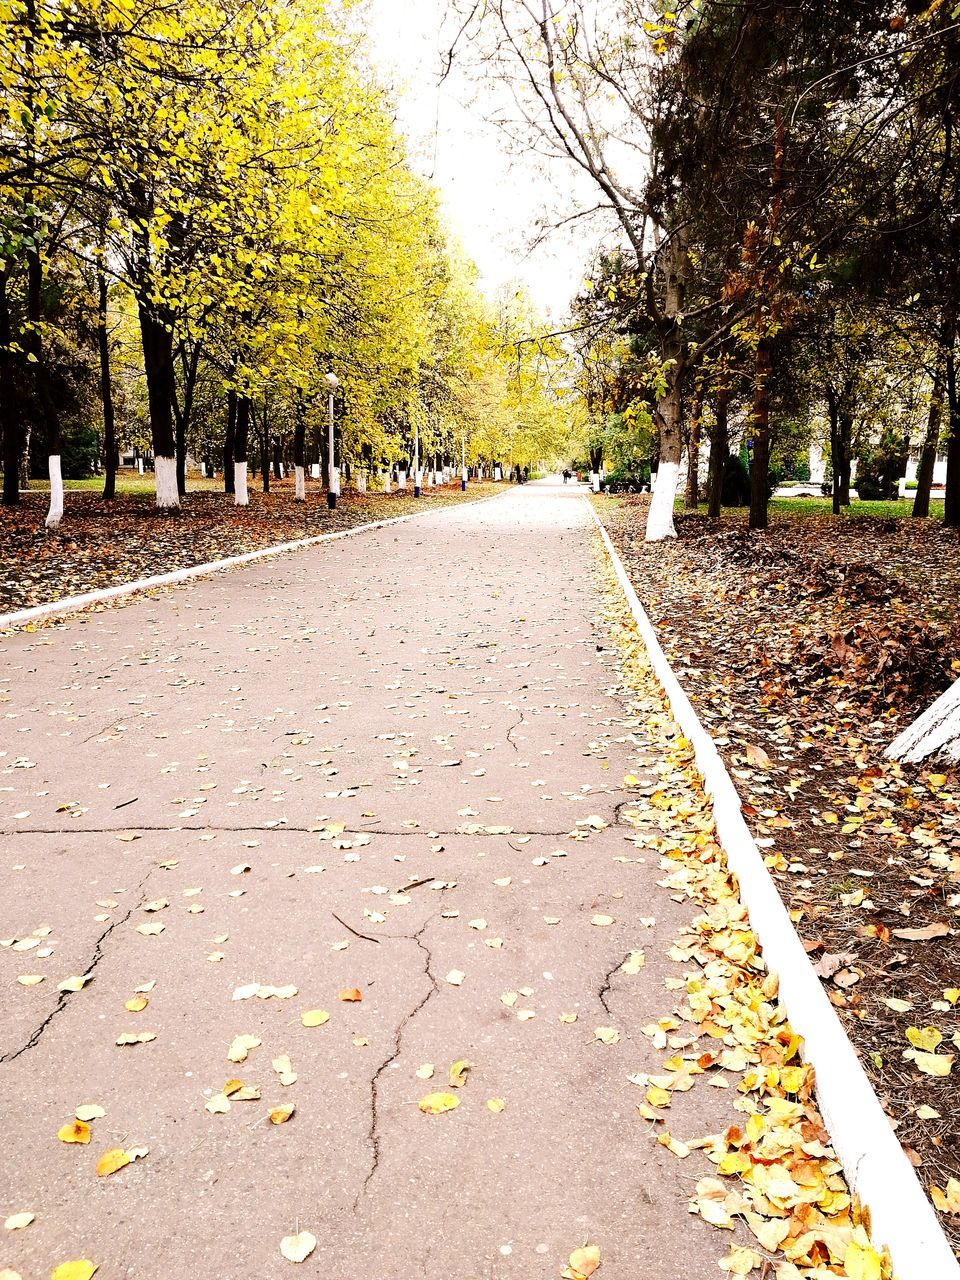 SURFACE LEVEL OF ROAD AMIDST LEAVES IN PARK